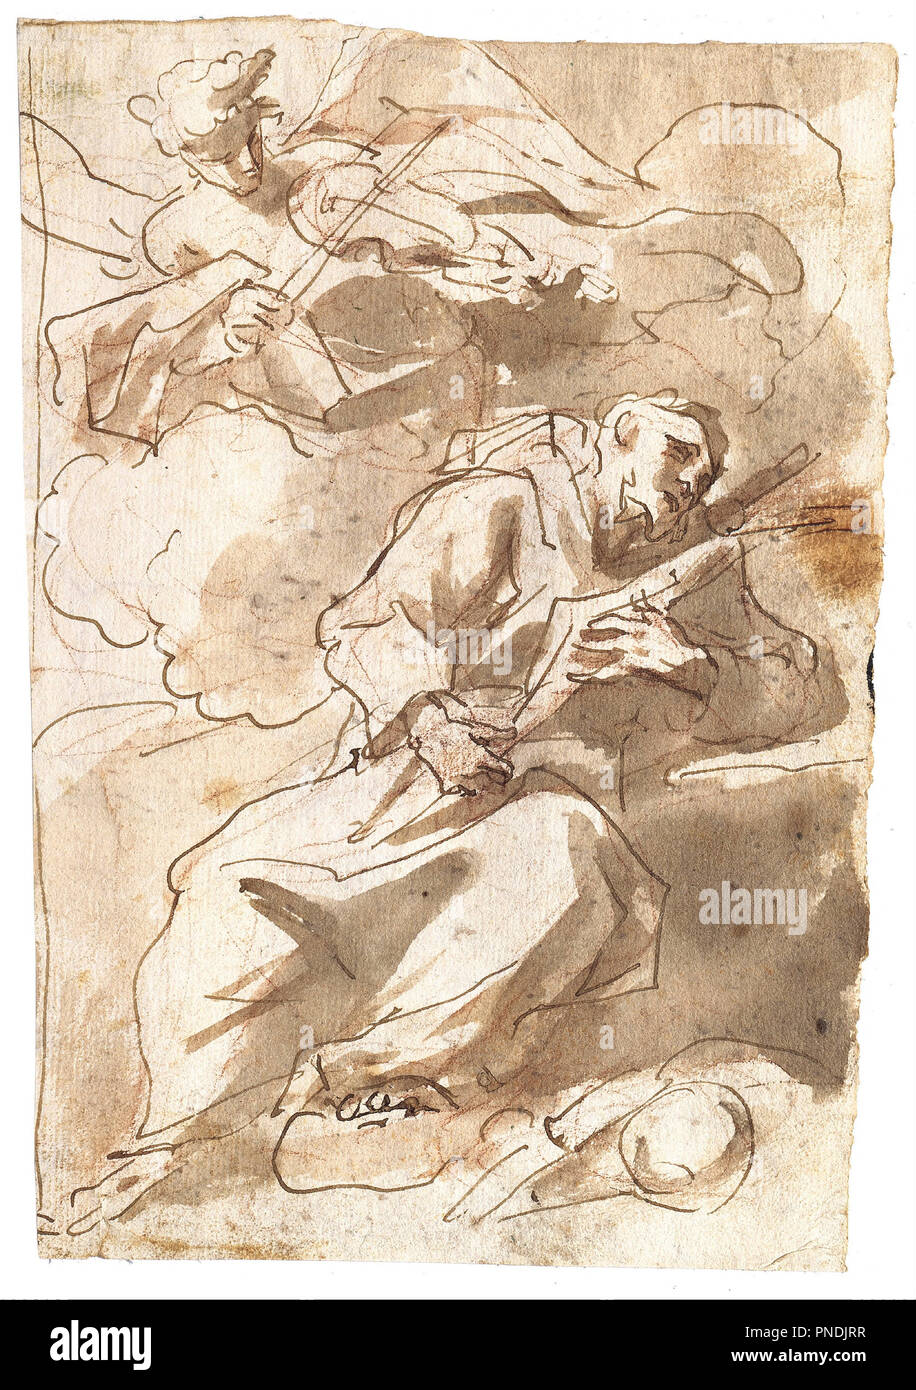 An Angelic Minstrel Appears to Saint Francis. Date/Period: 1750. Pen and brown ink, over red chalk, grey-brown wash. Feder in Braun, über Rötel, graubraun laviert. Height: 252 mm (9.92 in); Width: 179 mm (7.04 in). Author: GASPARE DIZIANI. Stock Photo